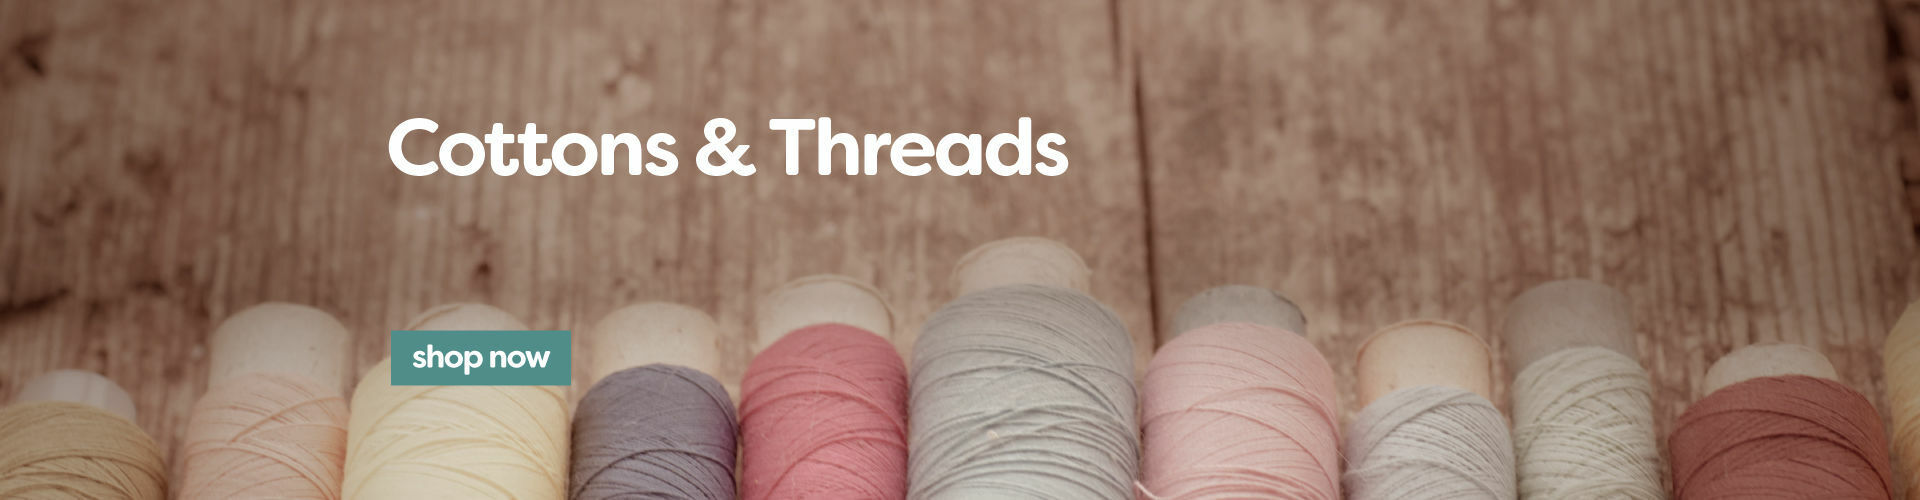 Cottons & Threads